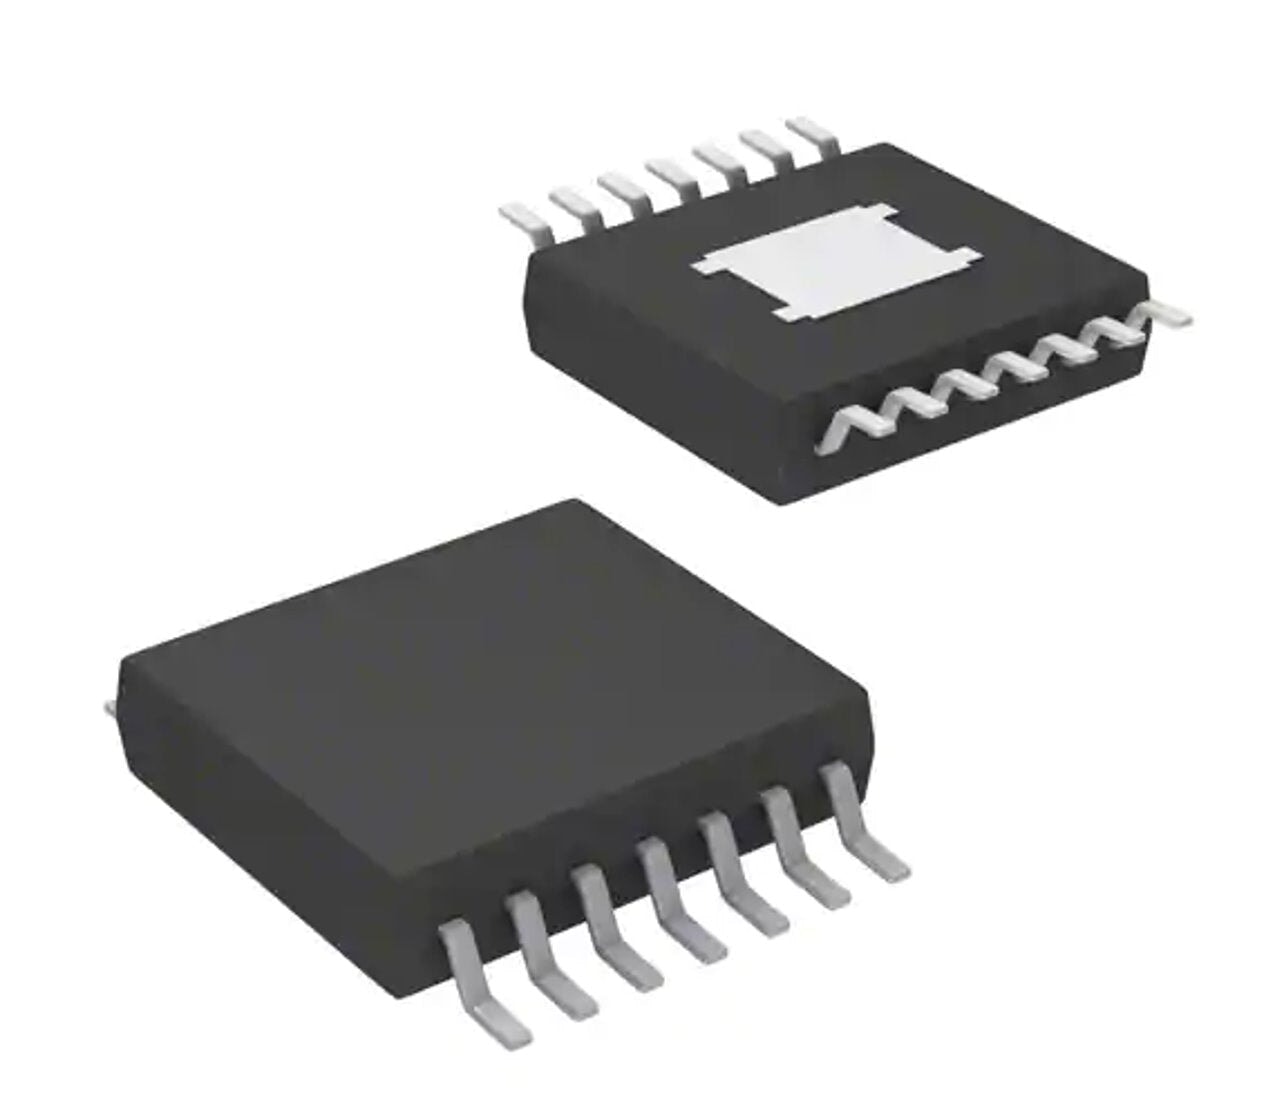 Infineon Technologies Touch Screen Controllers Part #CY8CMBR3002-SX1IT | Controller | DEX Information Technology Infineon Technologies 